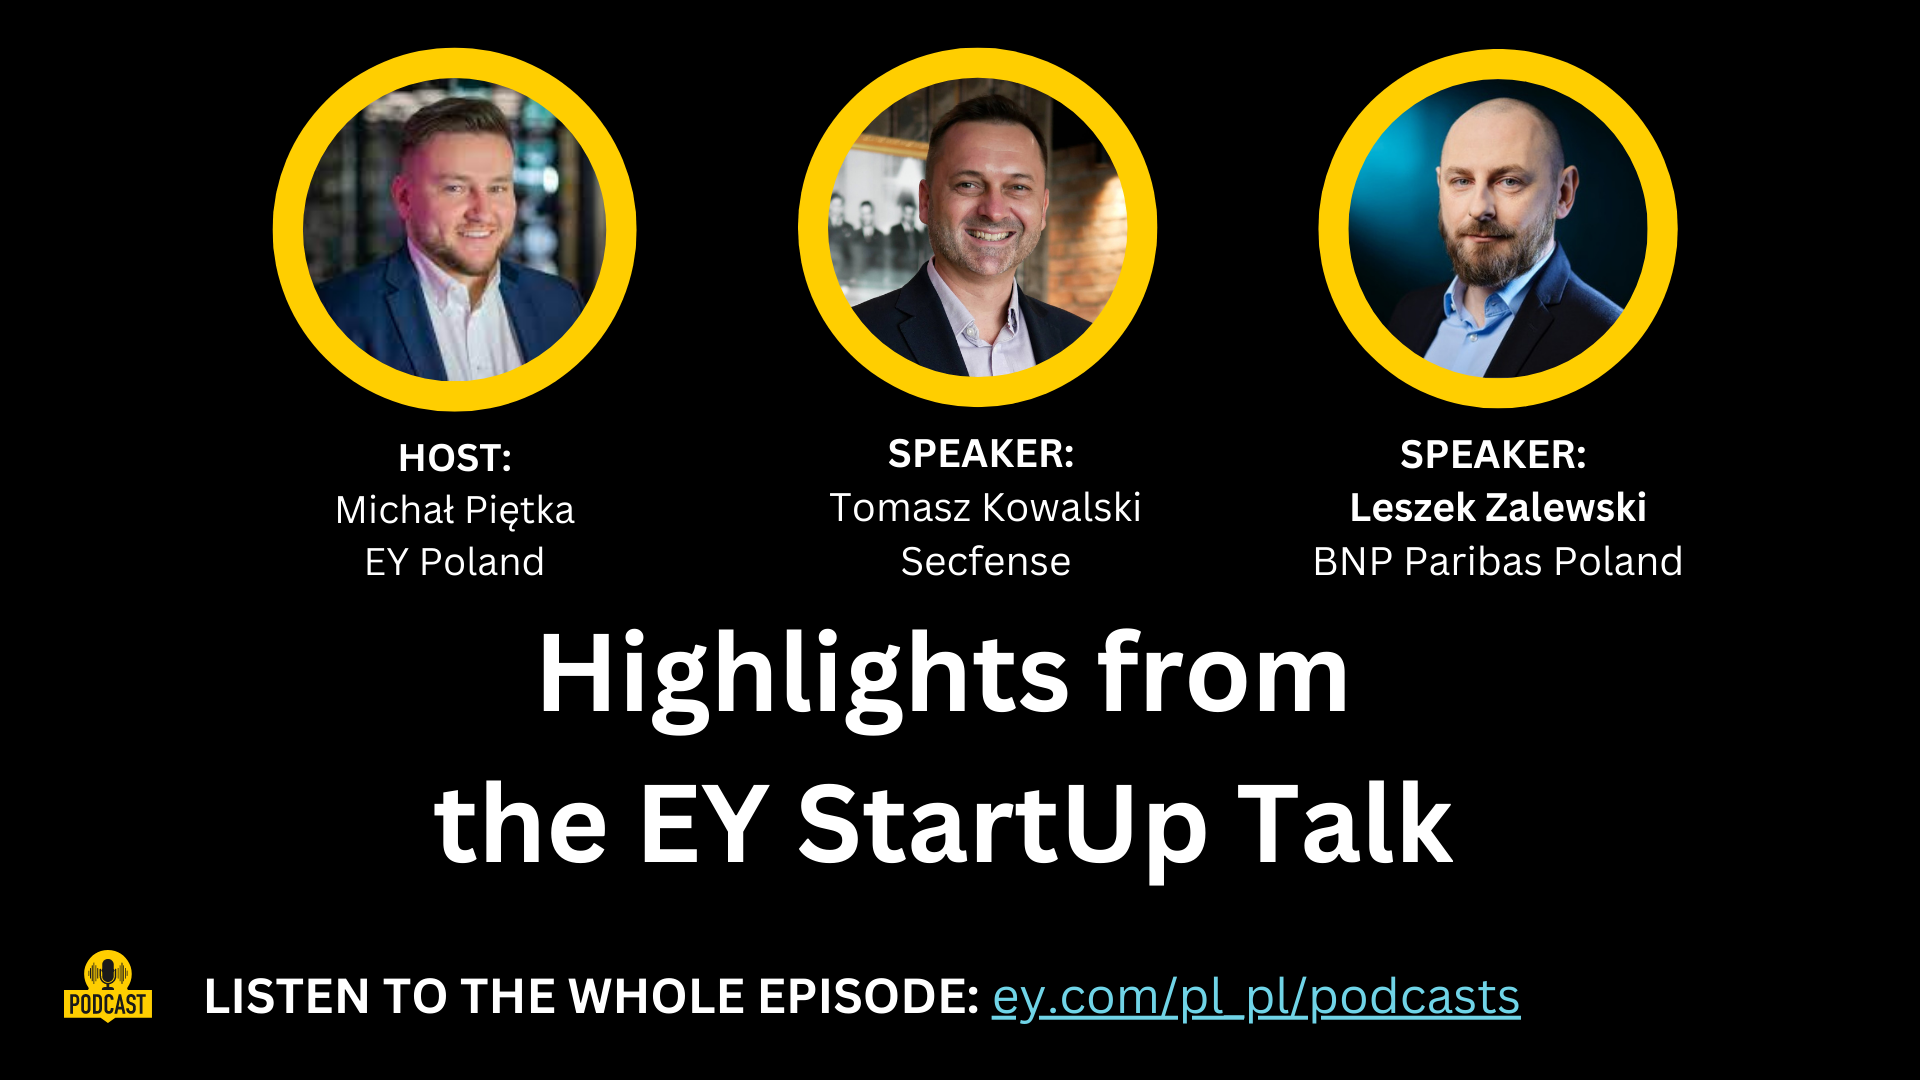 Highlights from the EY StartUp Talk with Secfense & BNP Paribas Poland